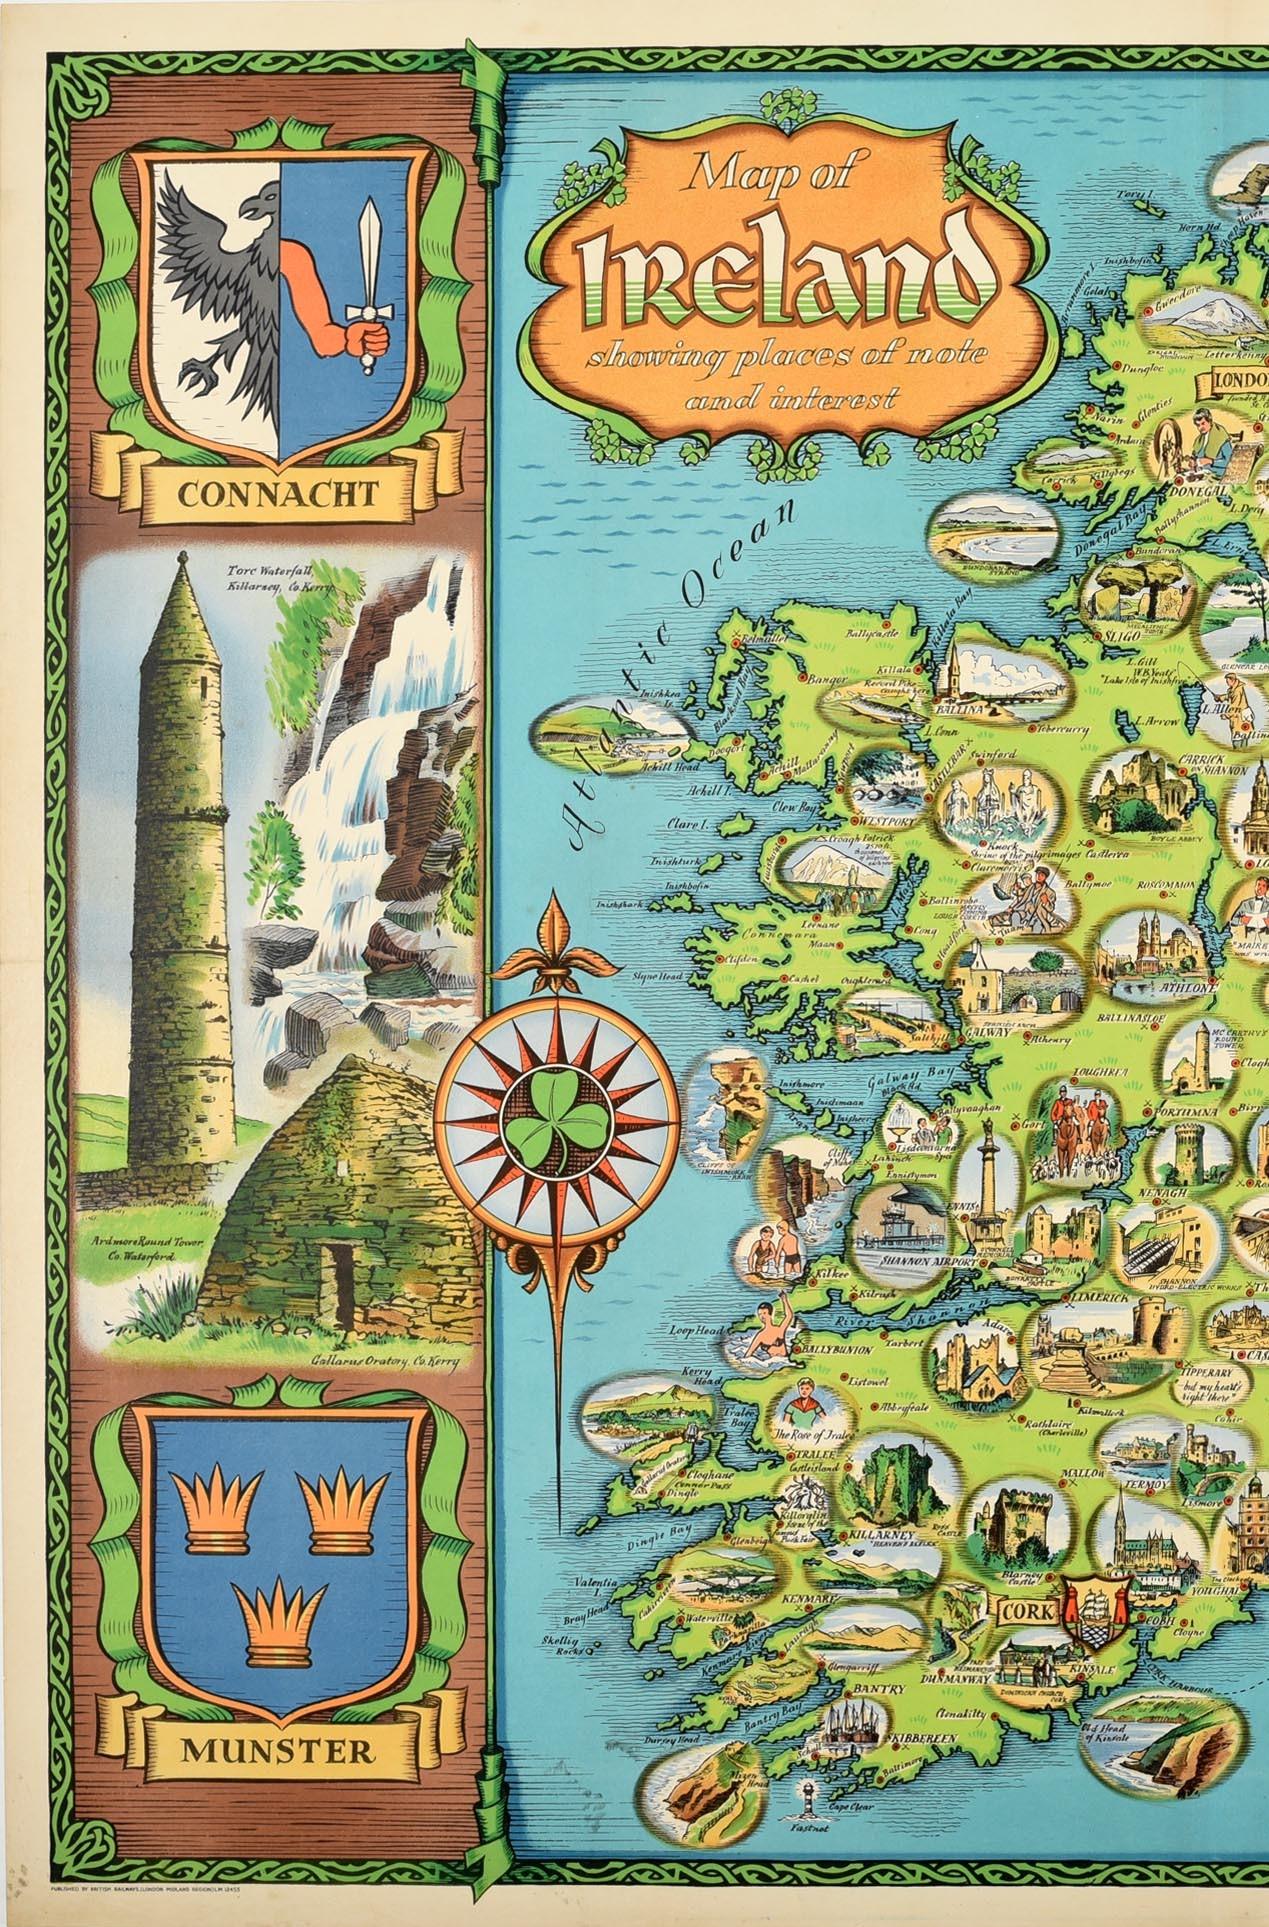 Original vintage poster - Map of Ireland showing places of note and interest. Colorful illustrated map of Ireland by David William Burley (1901-1990) including images of historic architecture such as bridges, castles and churches as well as people